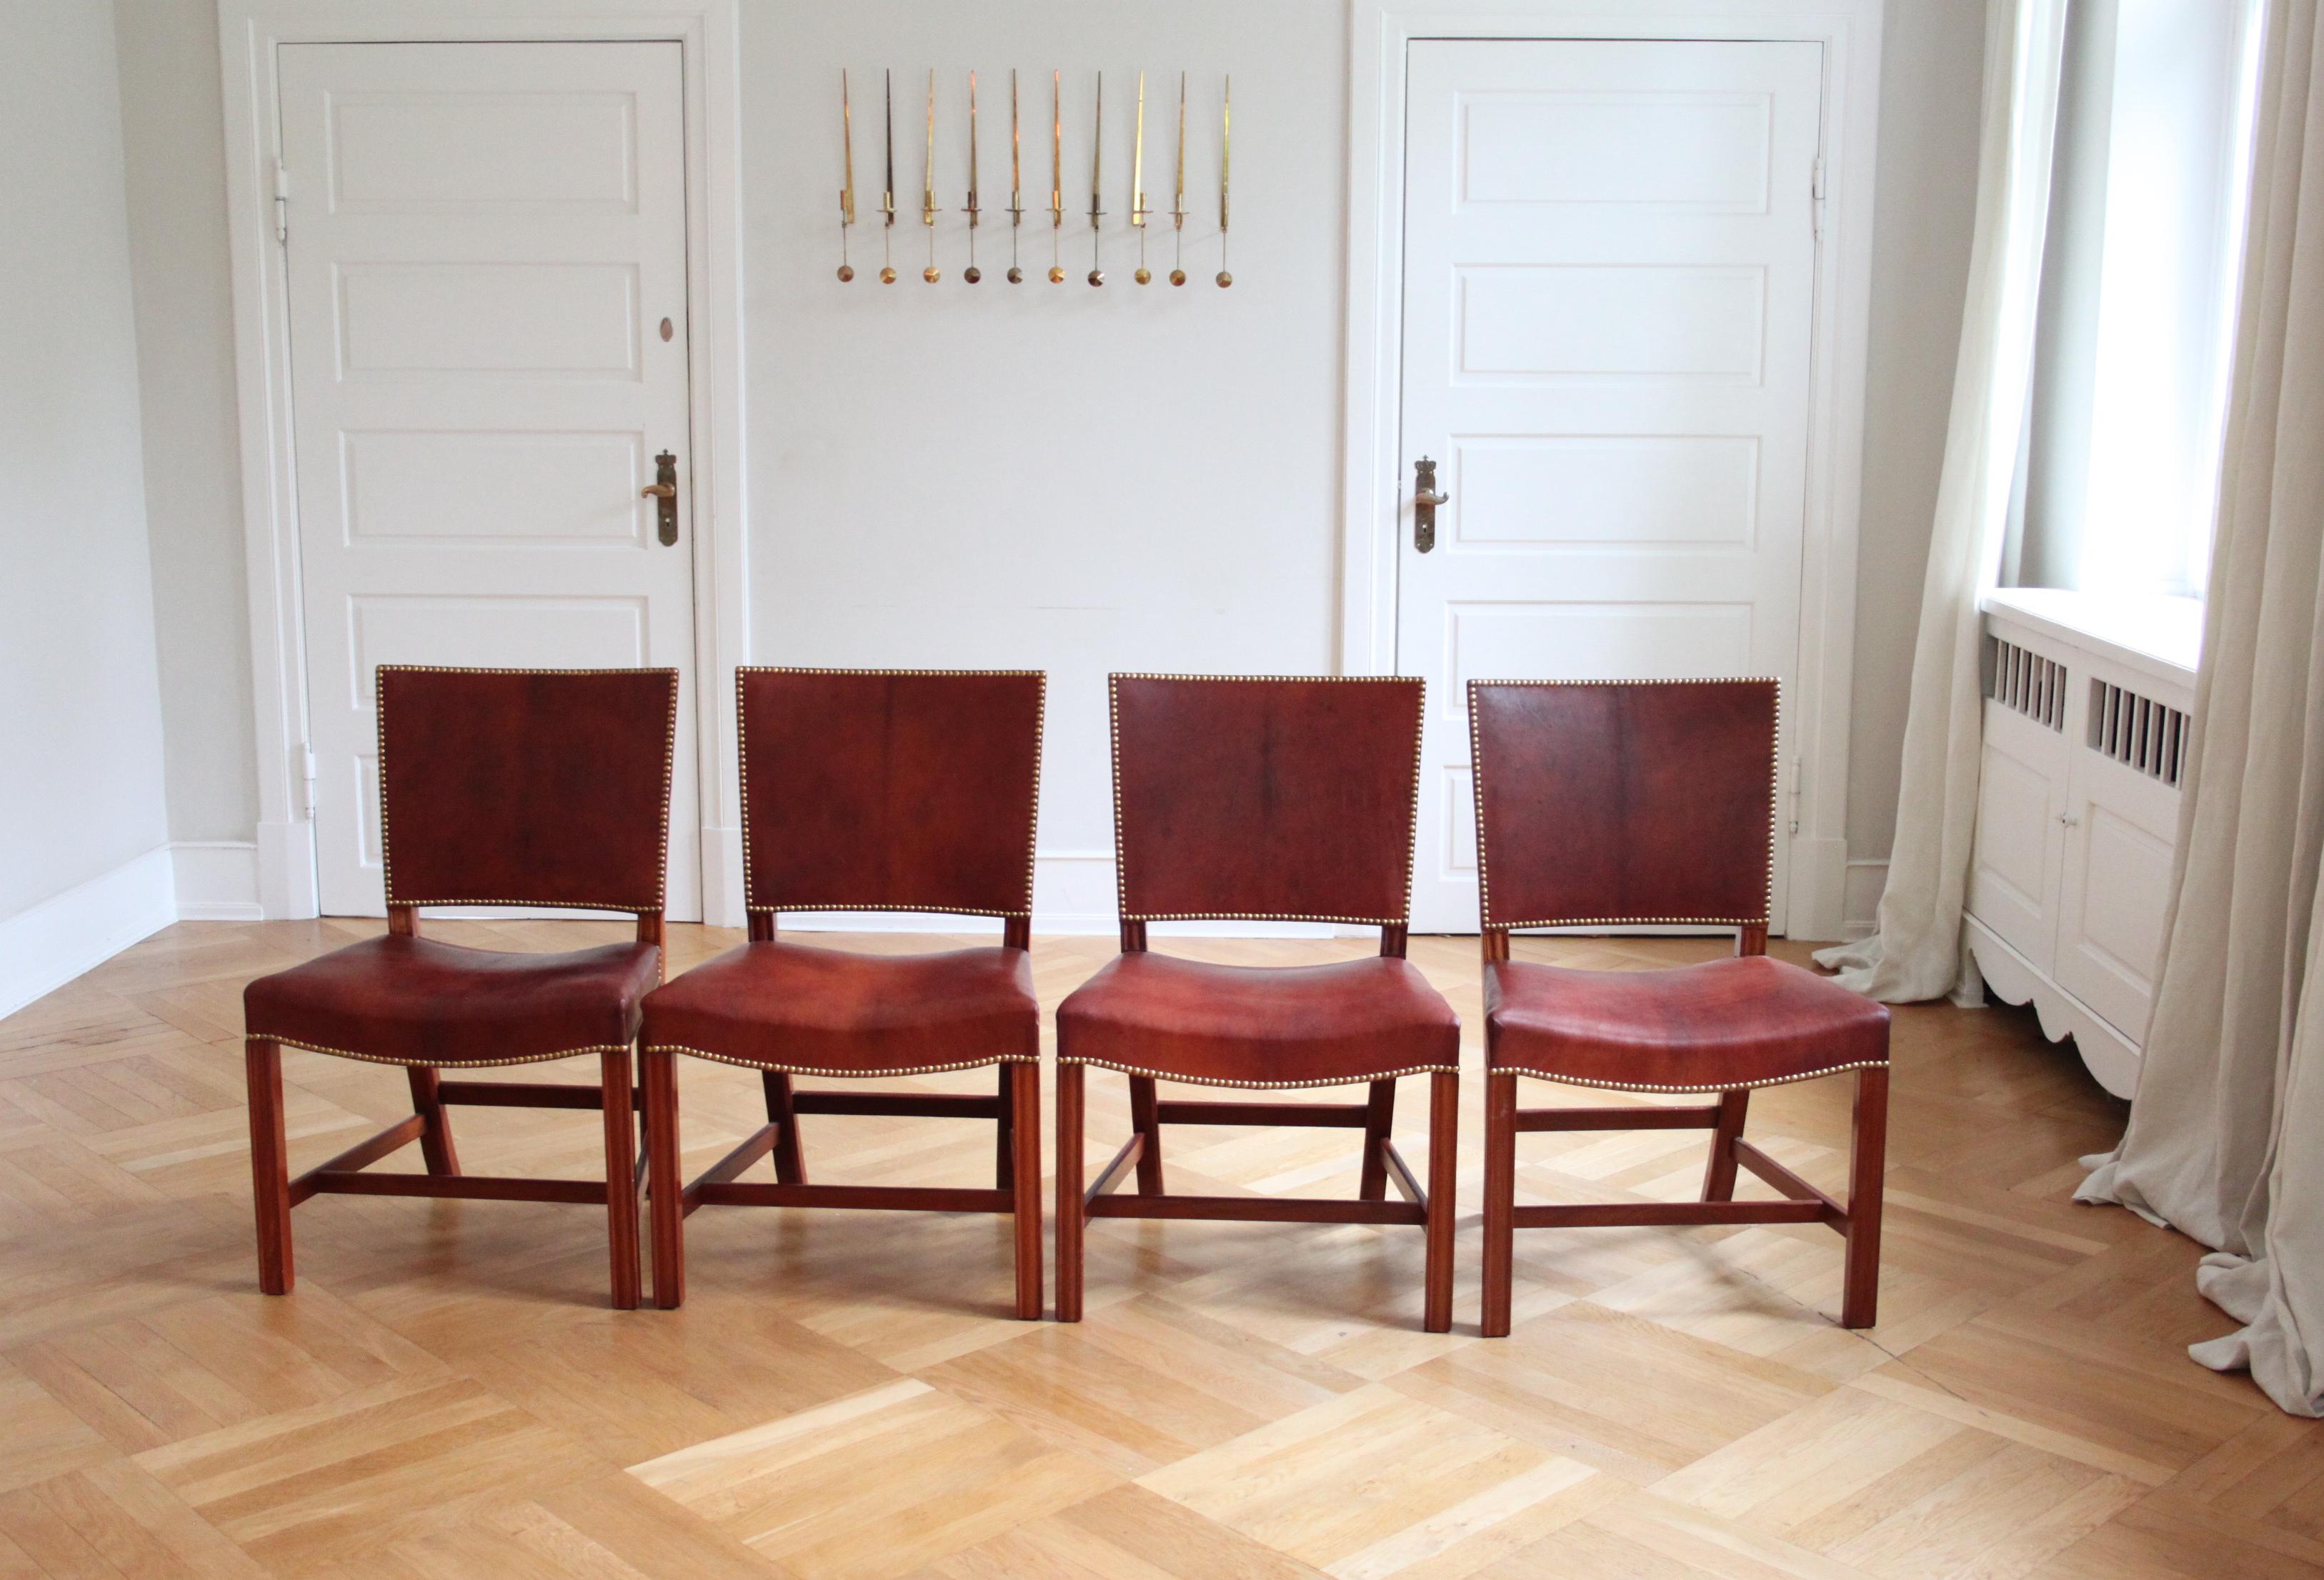 Set of Twelve Kaare Klint Red Chairs, Rud Rasmussen, Niger Leather and Mahogany For Sale 2